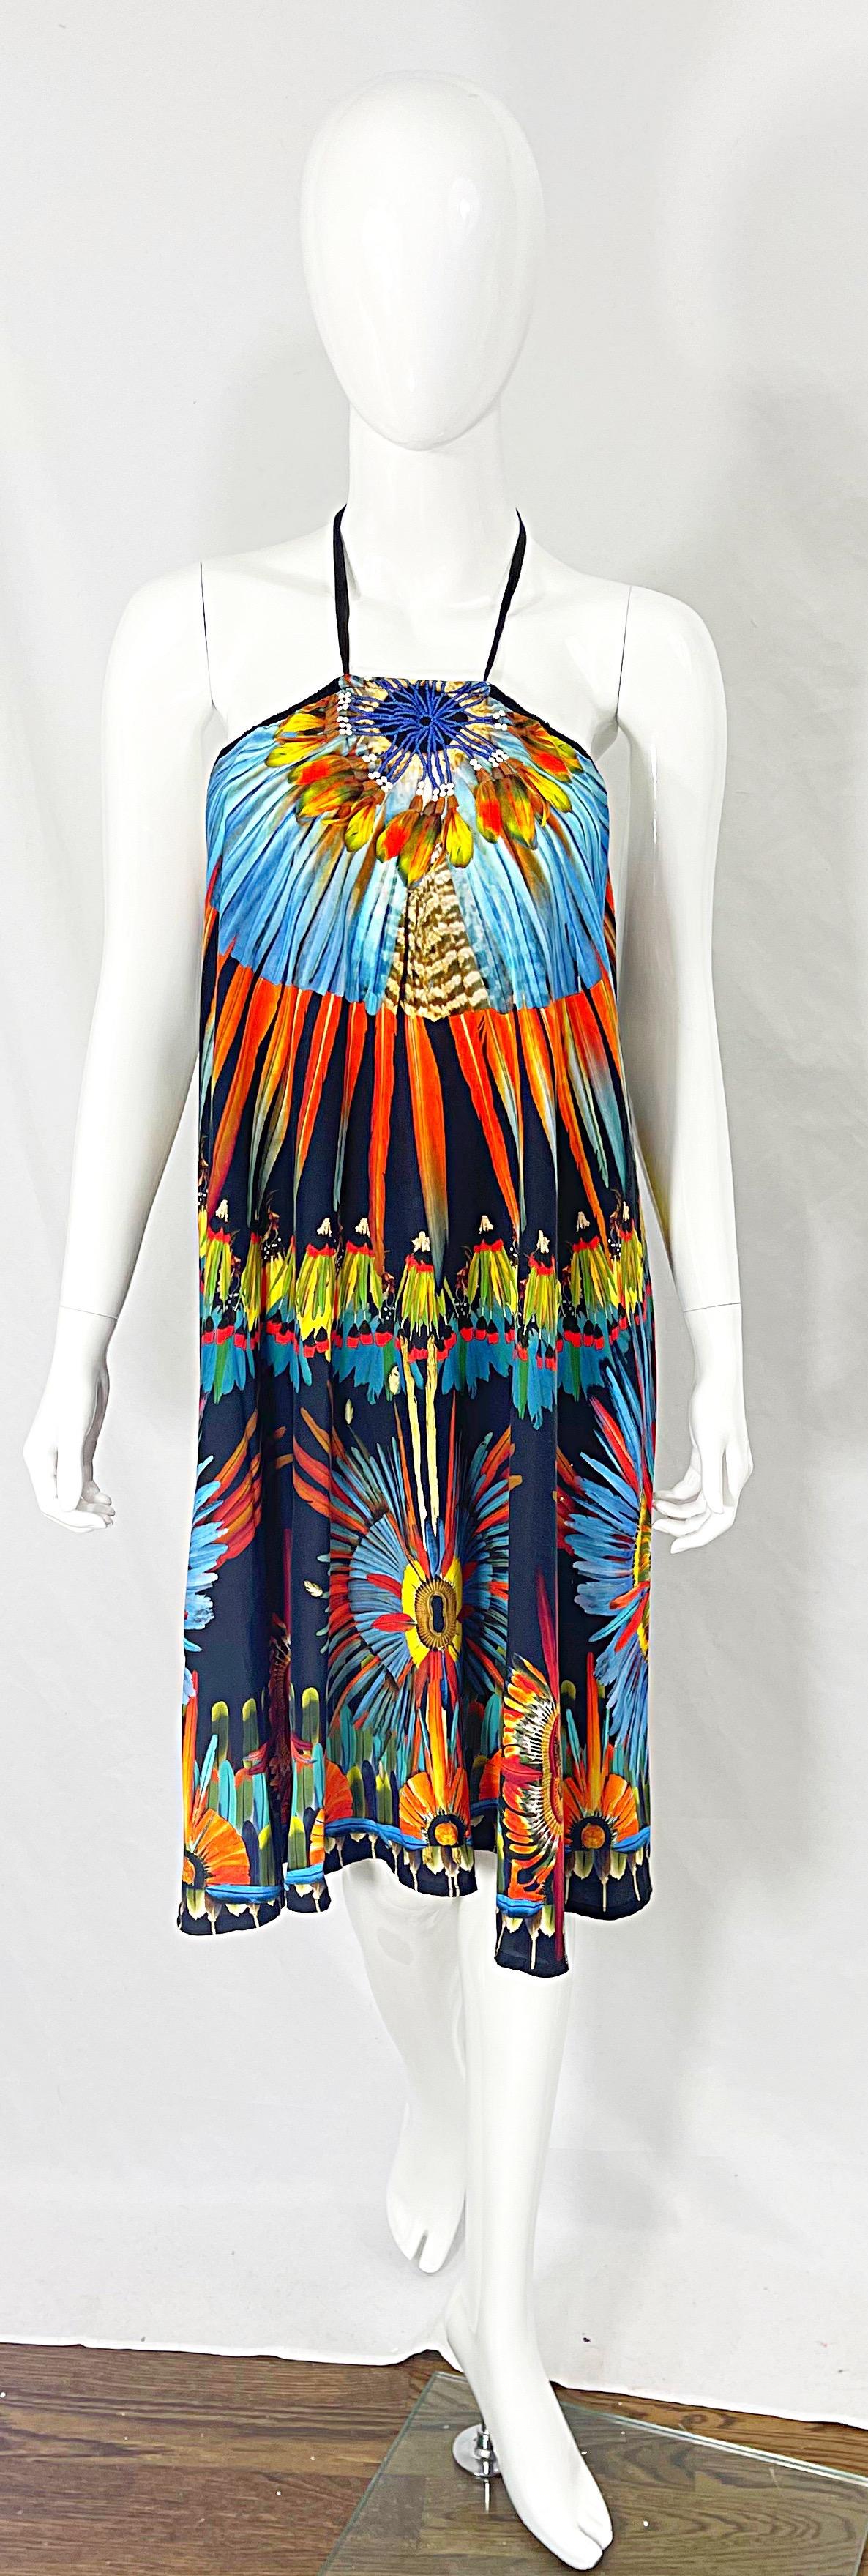 Chic 90s vintage JEAN PAUL GAULTIER brightly colored novelty feather print rayon halter dress ! The neckline features what looks to be a feathered necklace. Bright colors of orange, yellow, blue, and red throughout. Ties at top back neck with brass